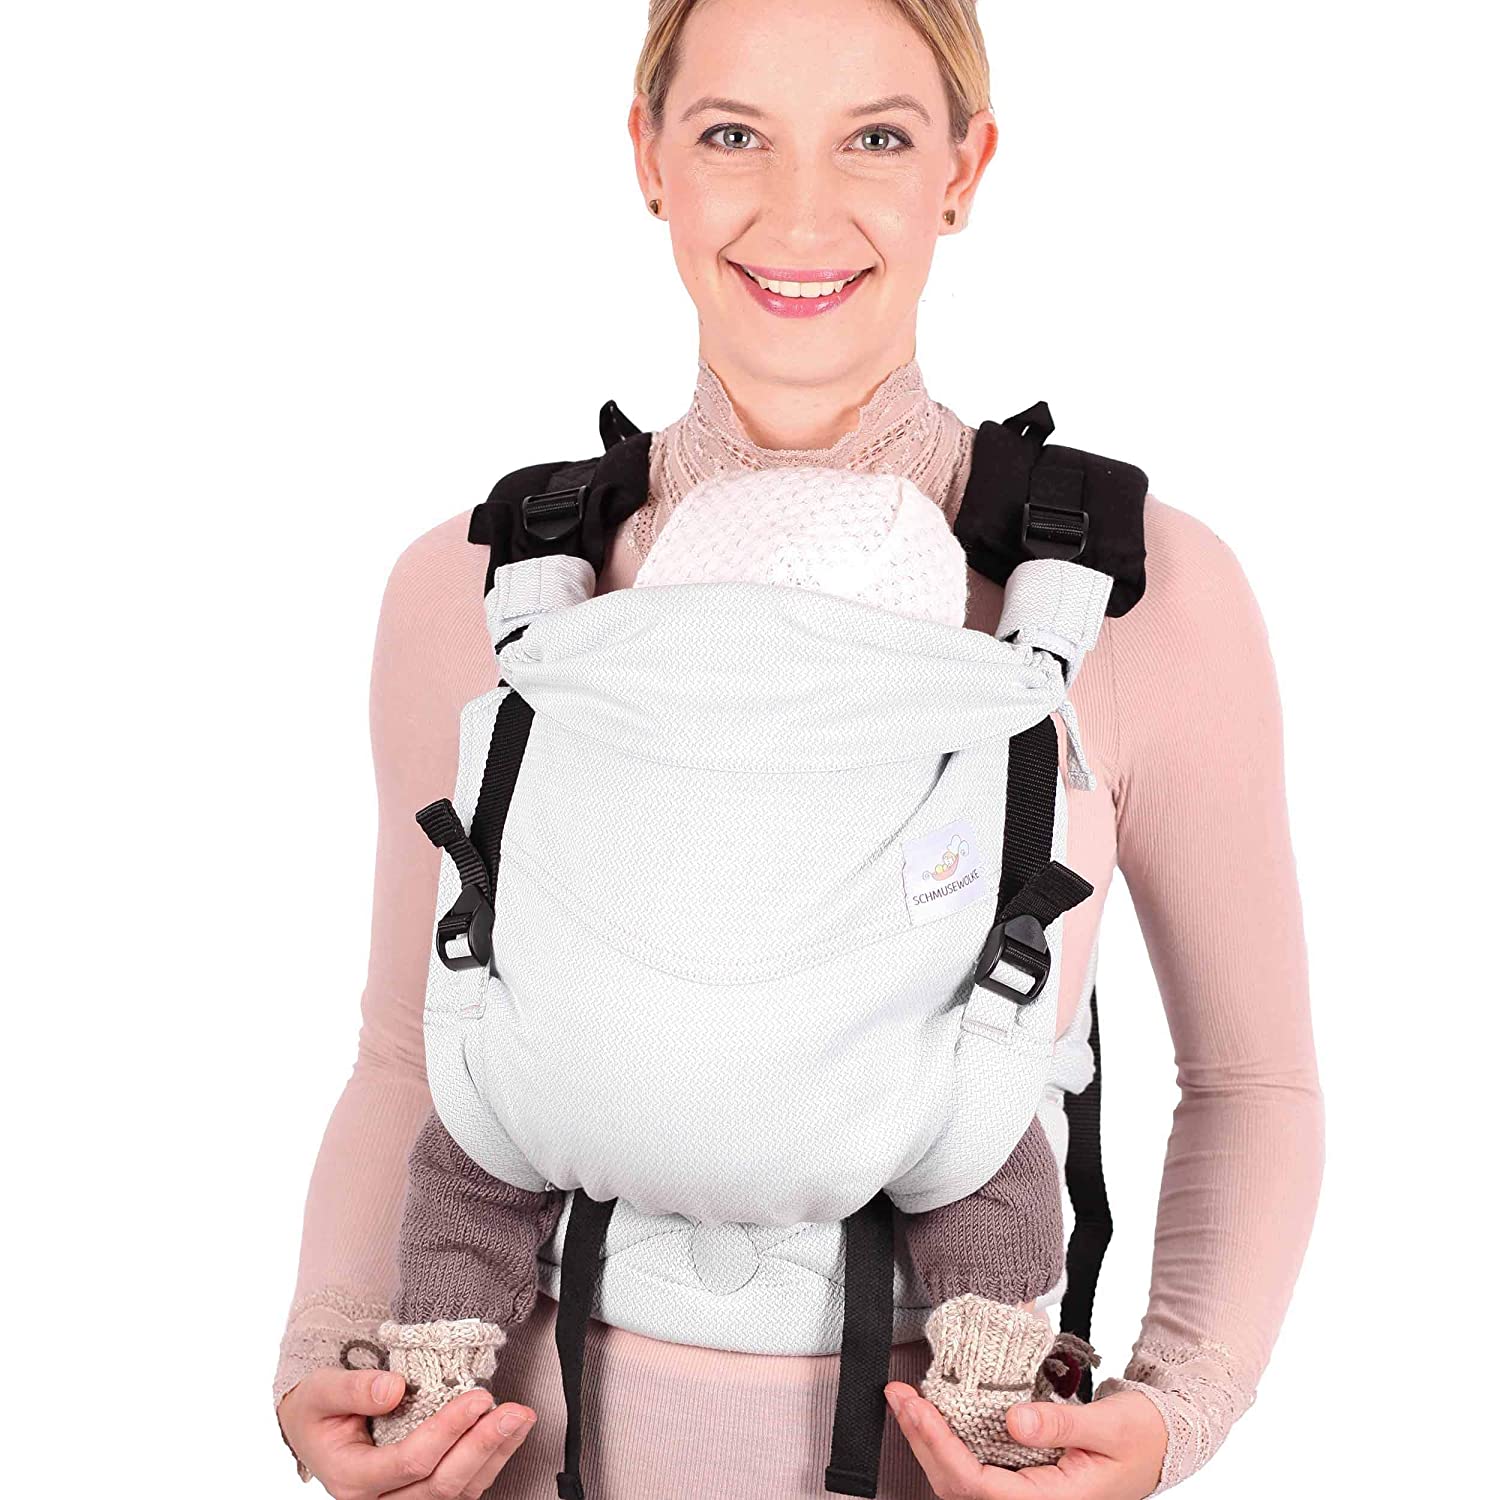 Schmusewolke Baby Carrier For Newborns And Toddlers With Organic Cotton And Comfort Full Buckle, Front and Back Carrier